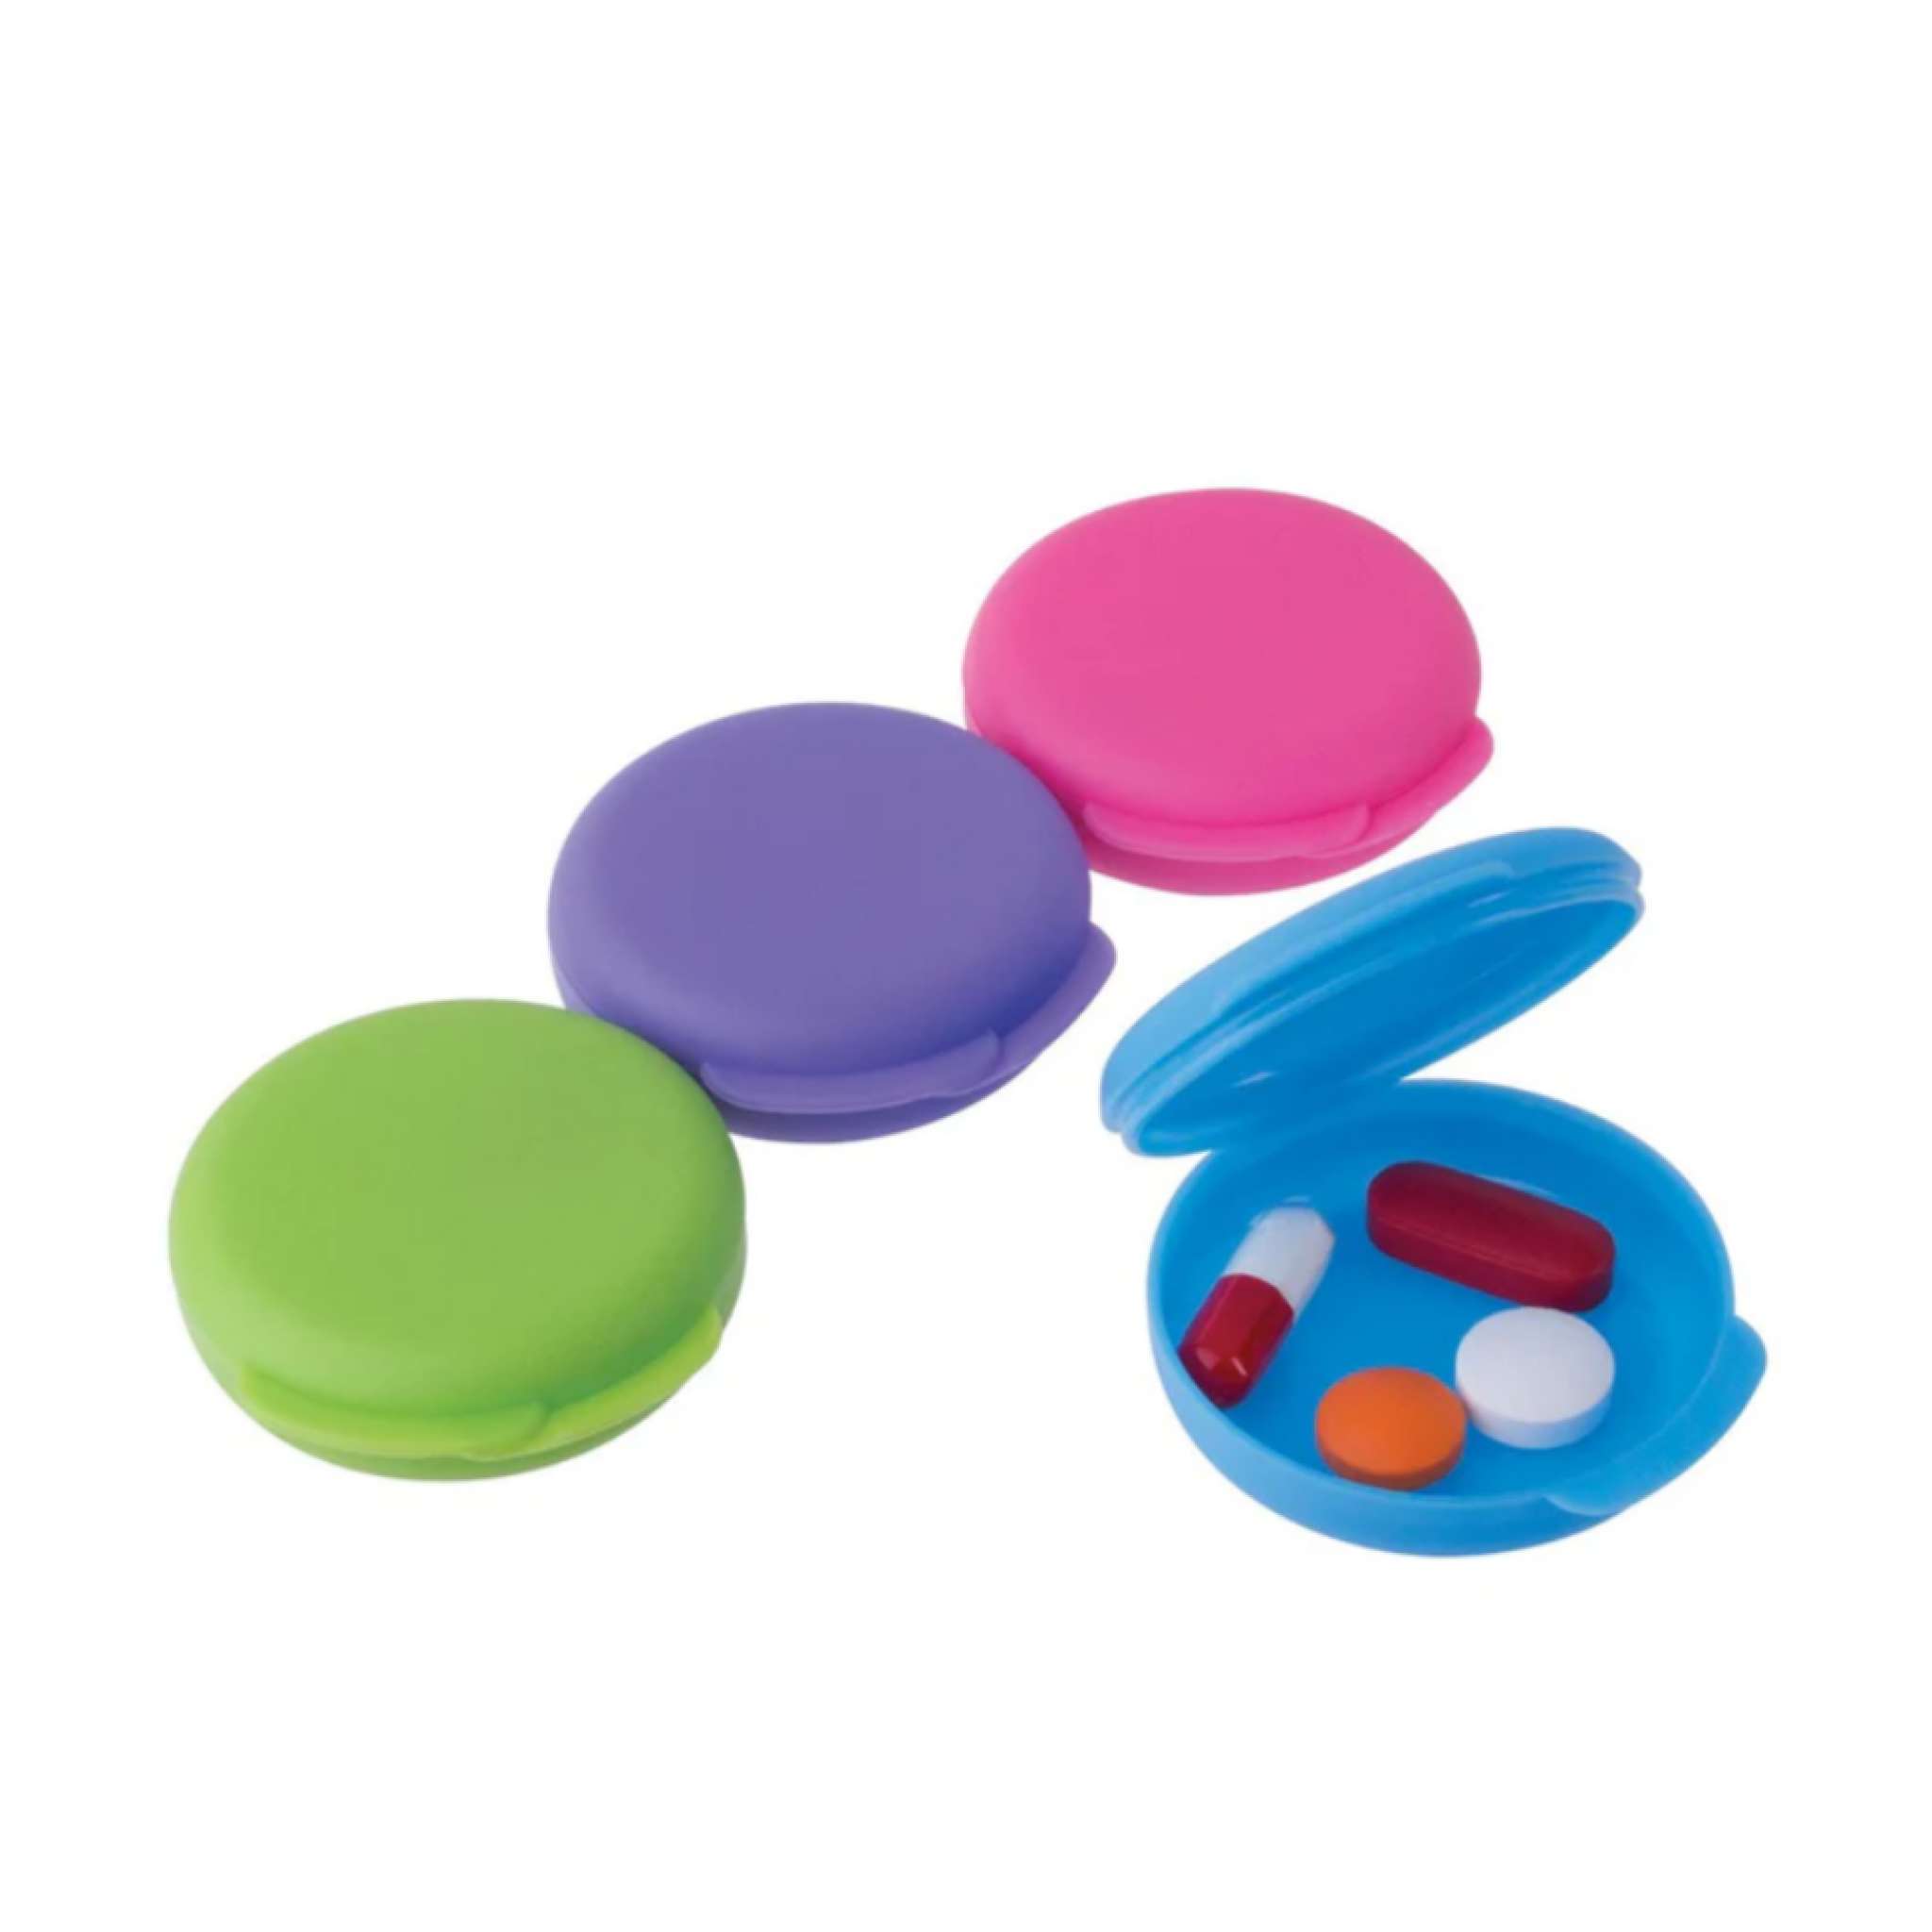 Apothecary Products - Pill Container Pocket 2pk